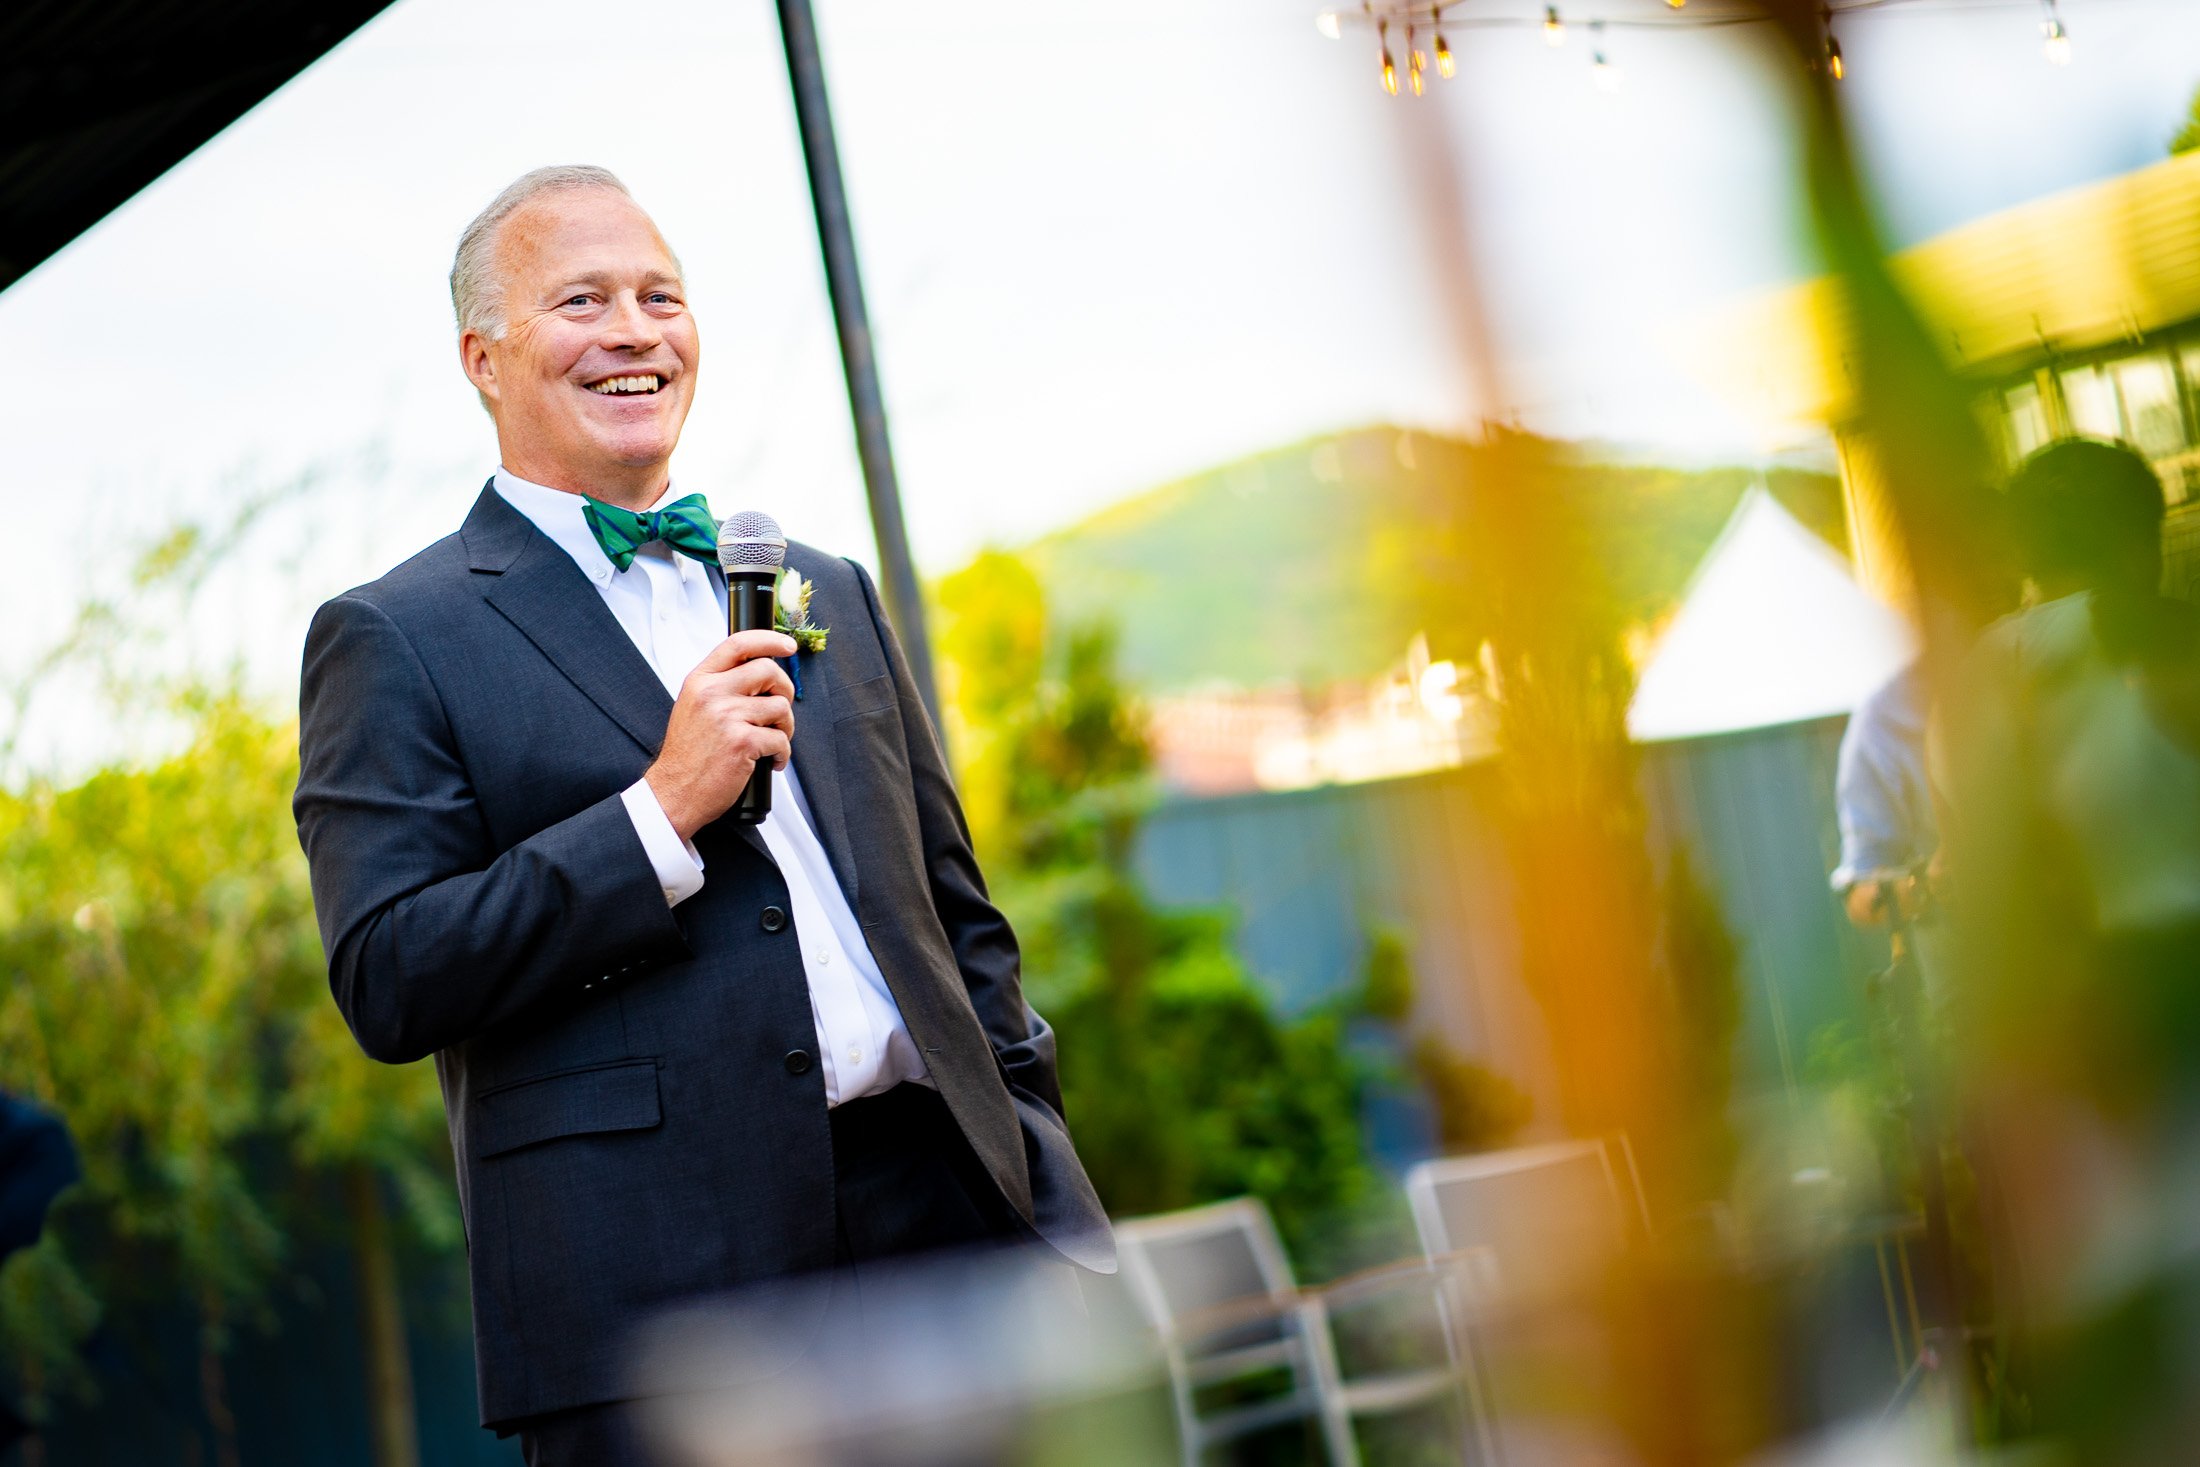 Father of the bride gives a speech while standing on an outdoor patio during the wedding reception, wedding, wedding photos, wedding photography, wedding photographer, wedding inspiration, wedding photo inspiration, wedding portraits, wedding ceremony, wedding reception, mountain wedding, Catholic Church wedding, Catholic Church wedding photos, Catholic Church wedding photography, Catholic Church wedding photographer, Catholic Church wedding inspiration, Catholic Church wedding venue, Steamboat Springs wedding, Steamboat Springs wedding photos, Steamboat Springs wedding photography, Steamboat Springs wedding photographer, Colorado wedding, Colorado wedding photos, Colorado wedding photography, Colorado wedding photographer, Colorado mountain wedding, Colorado wedding inspiration